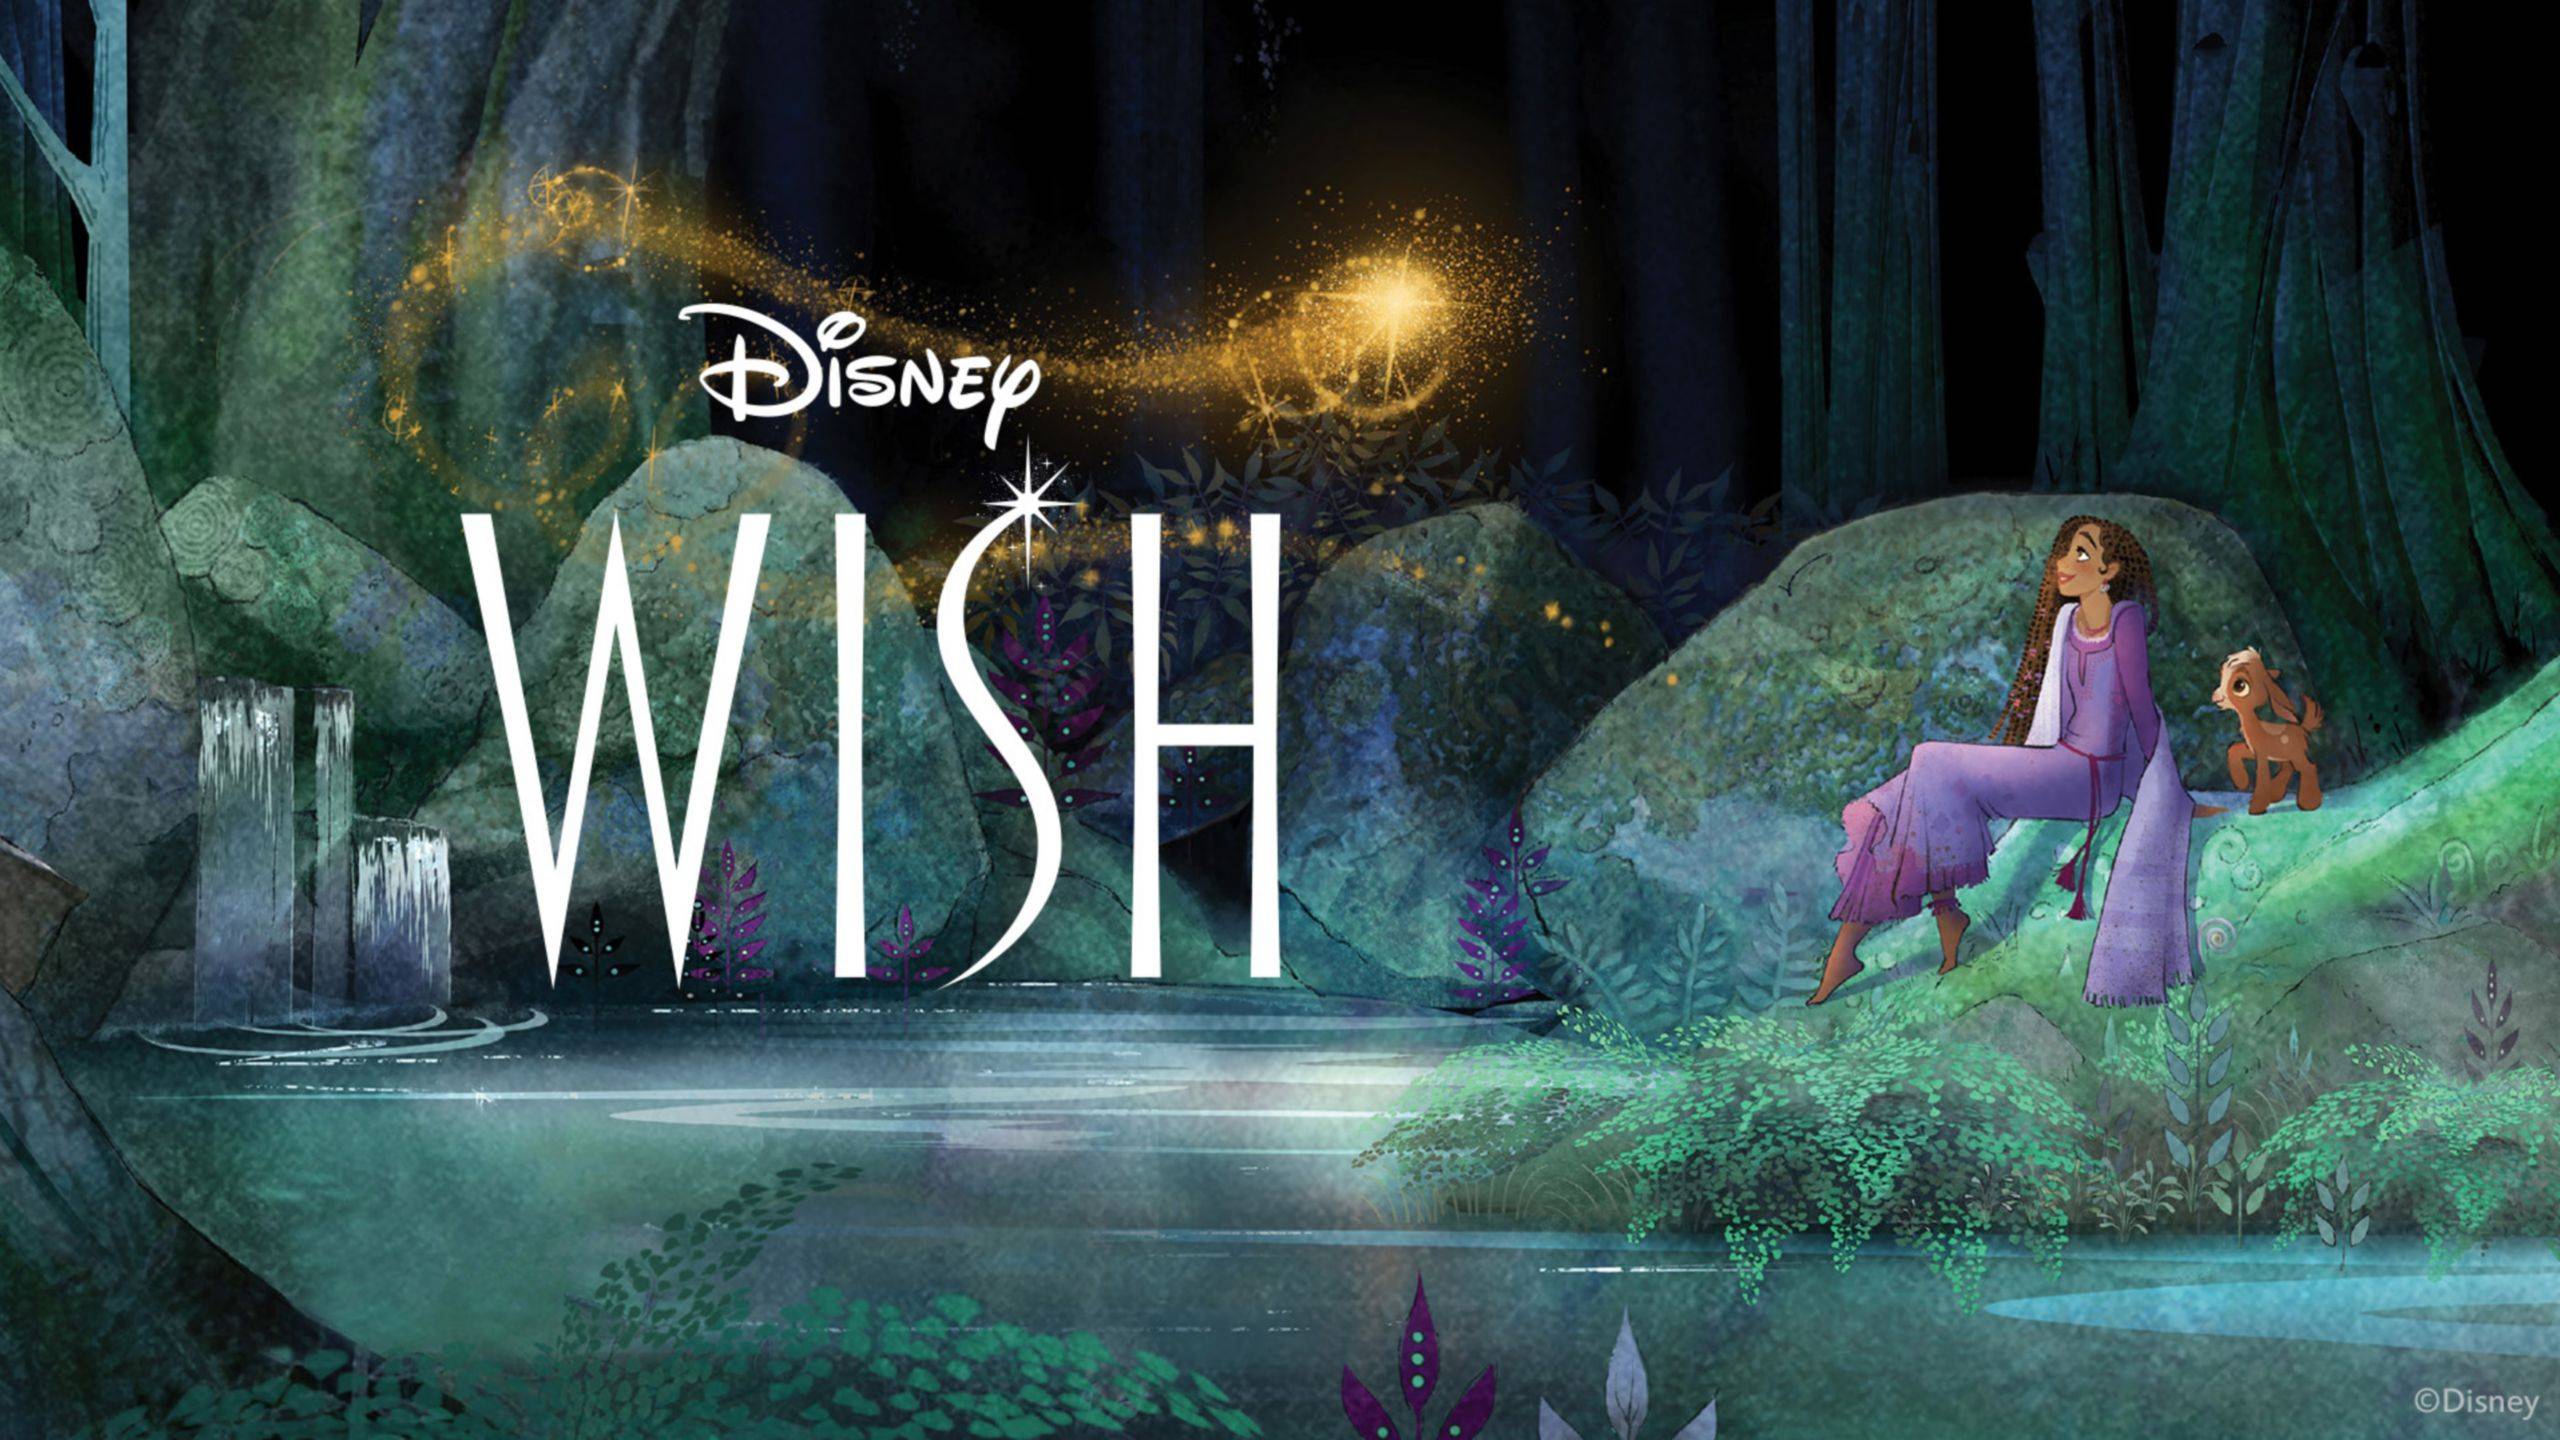 Complimentary Wish souvenir poster available soon for Walt Disney World Annual Passholders at EPCOT